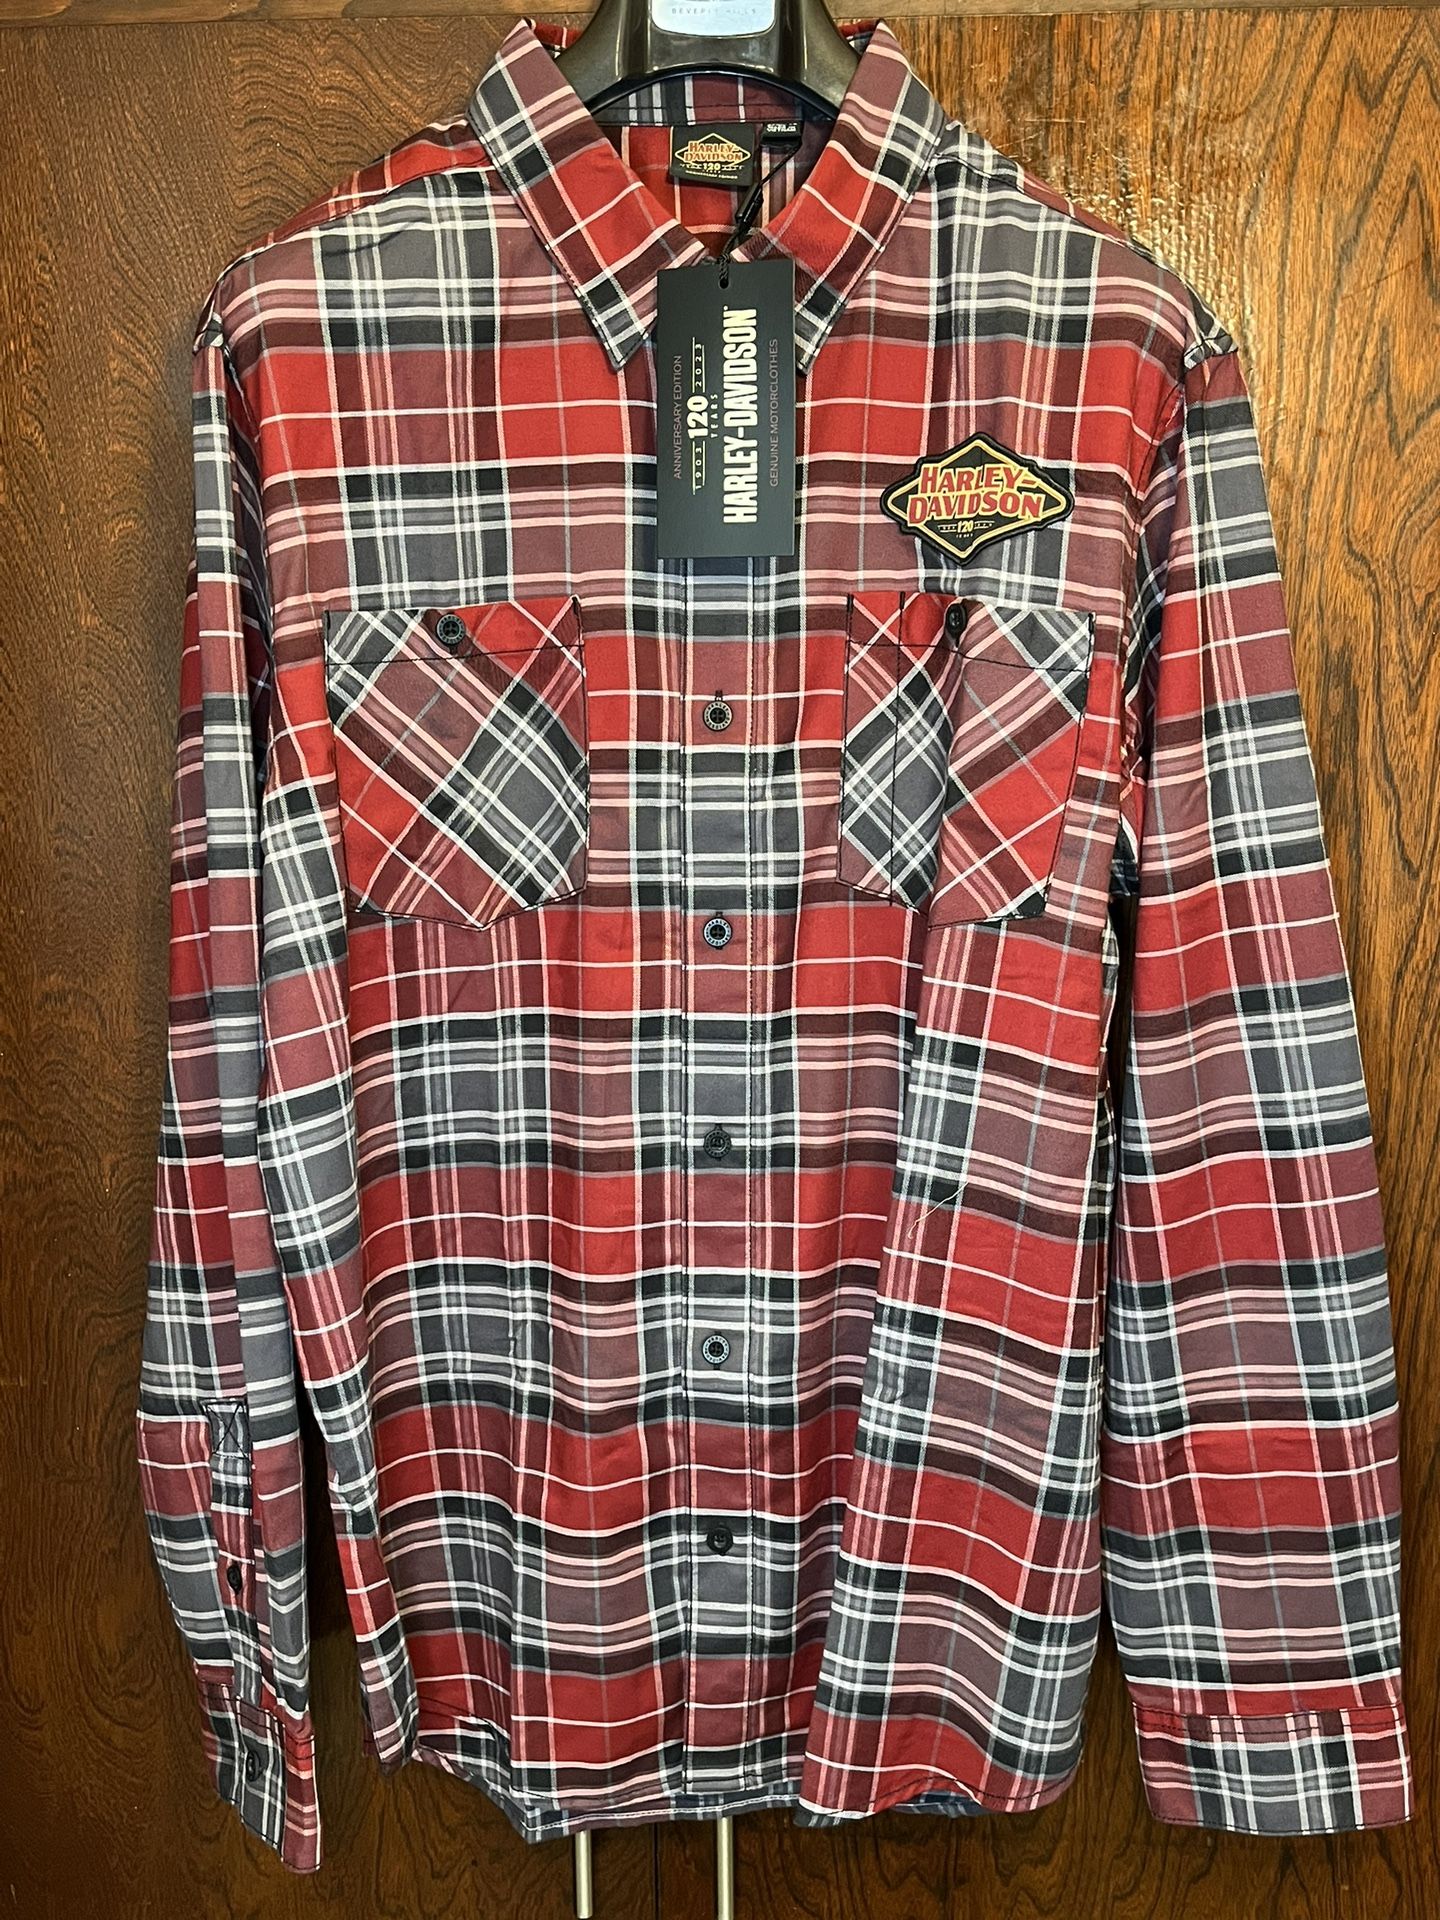 Harley Davidson 120th Anniversary Plaid Button Up Shirt Red Men’s Size XL New